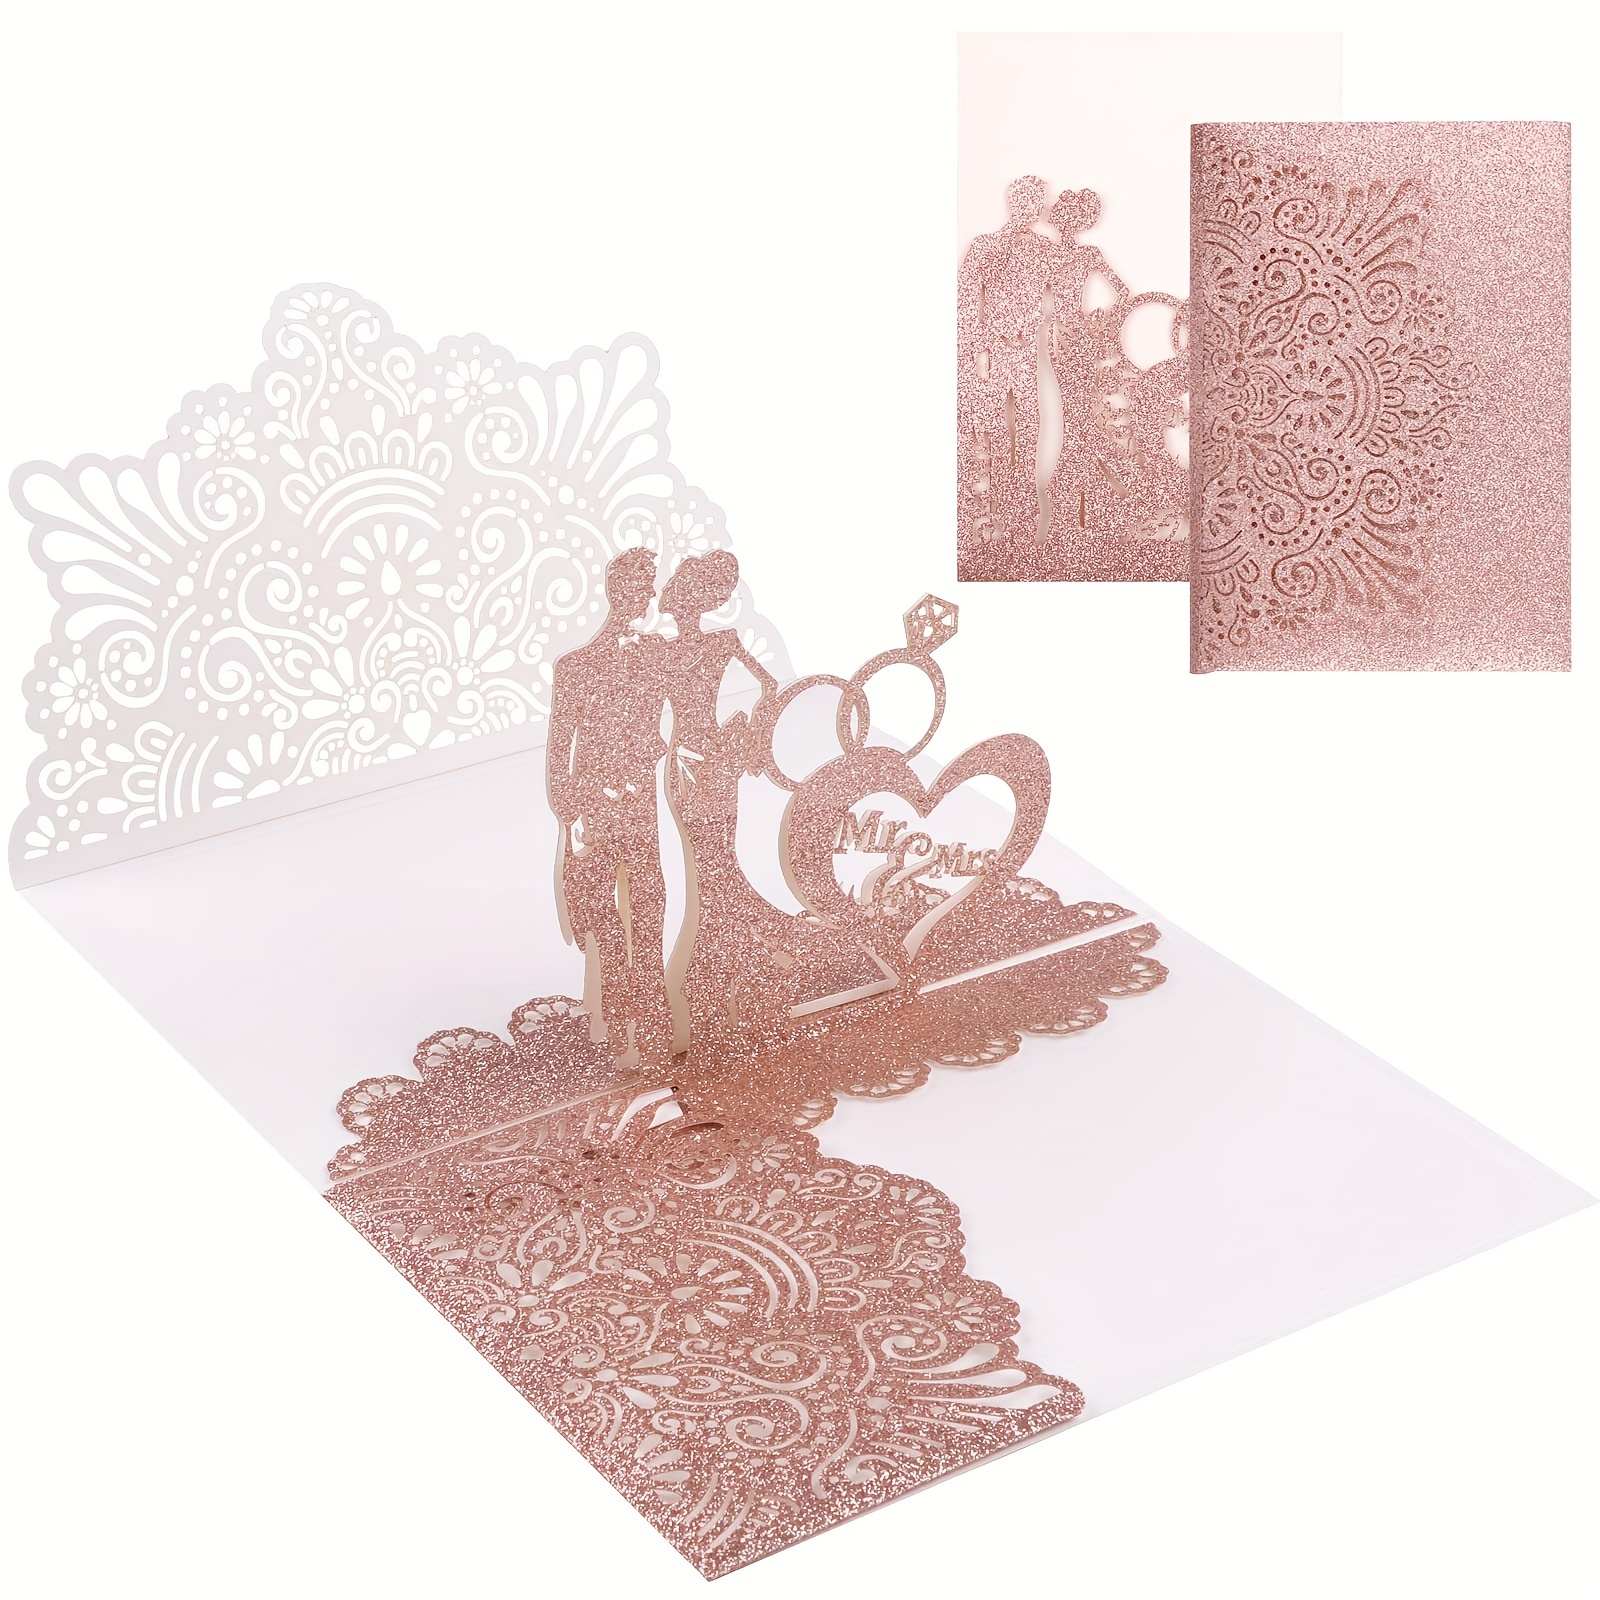 

1pc, Wedding Card, 3d Pop-up Card Bride And Groom, Glitter Rose Golden Wedding Card, Gift Card As Congratulations On The Wedding, Valentine's Day Card For Wedding Anniversary, Wedding Gift